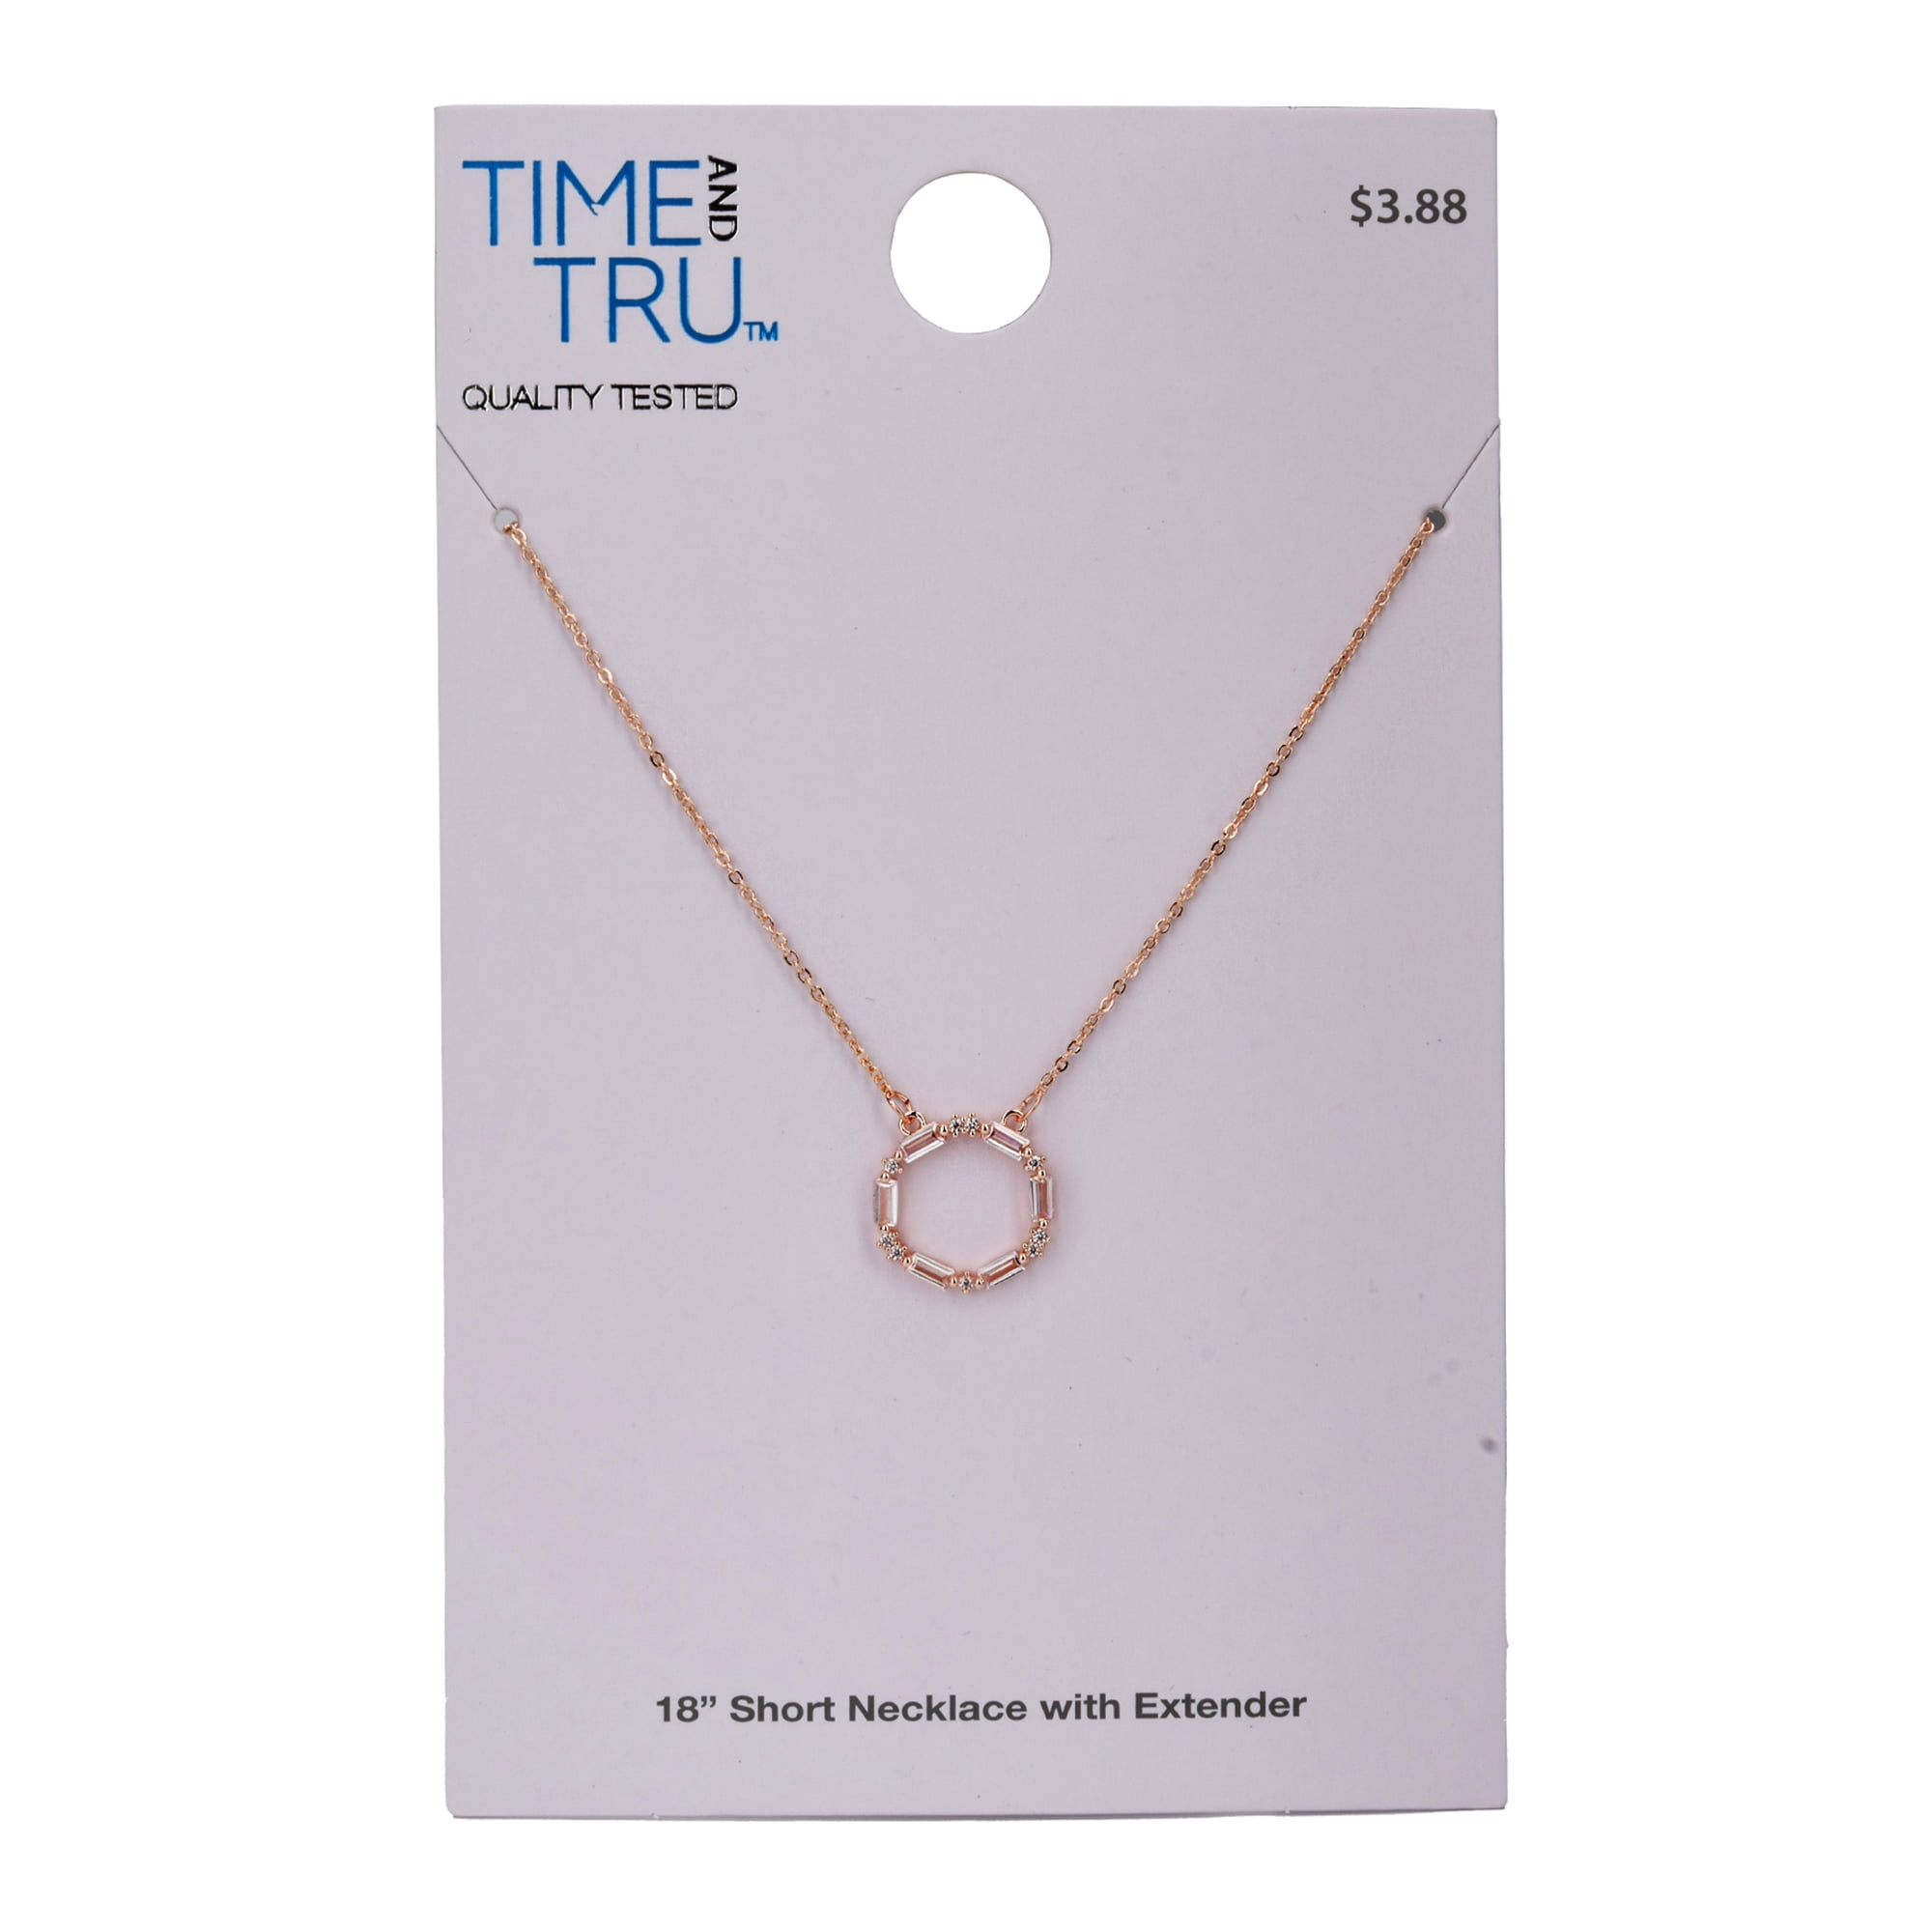 Time And Tru Women's Rose Gold Tone Baguette Crystal Stone Delicate Pendant Necklace